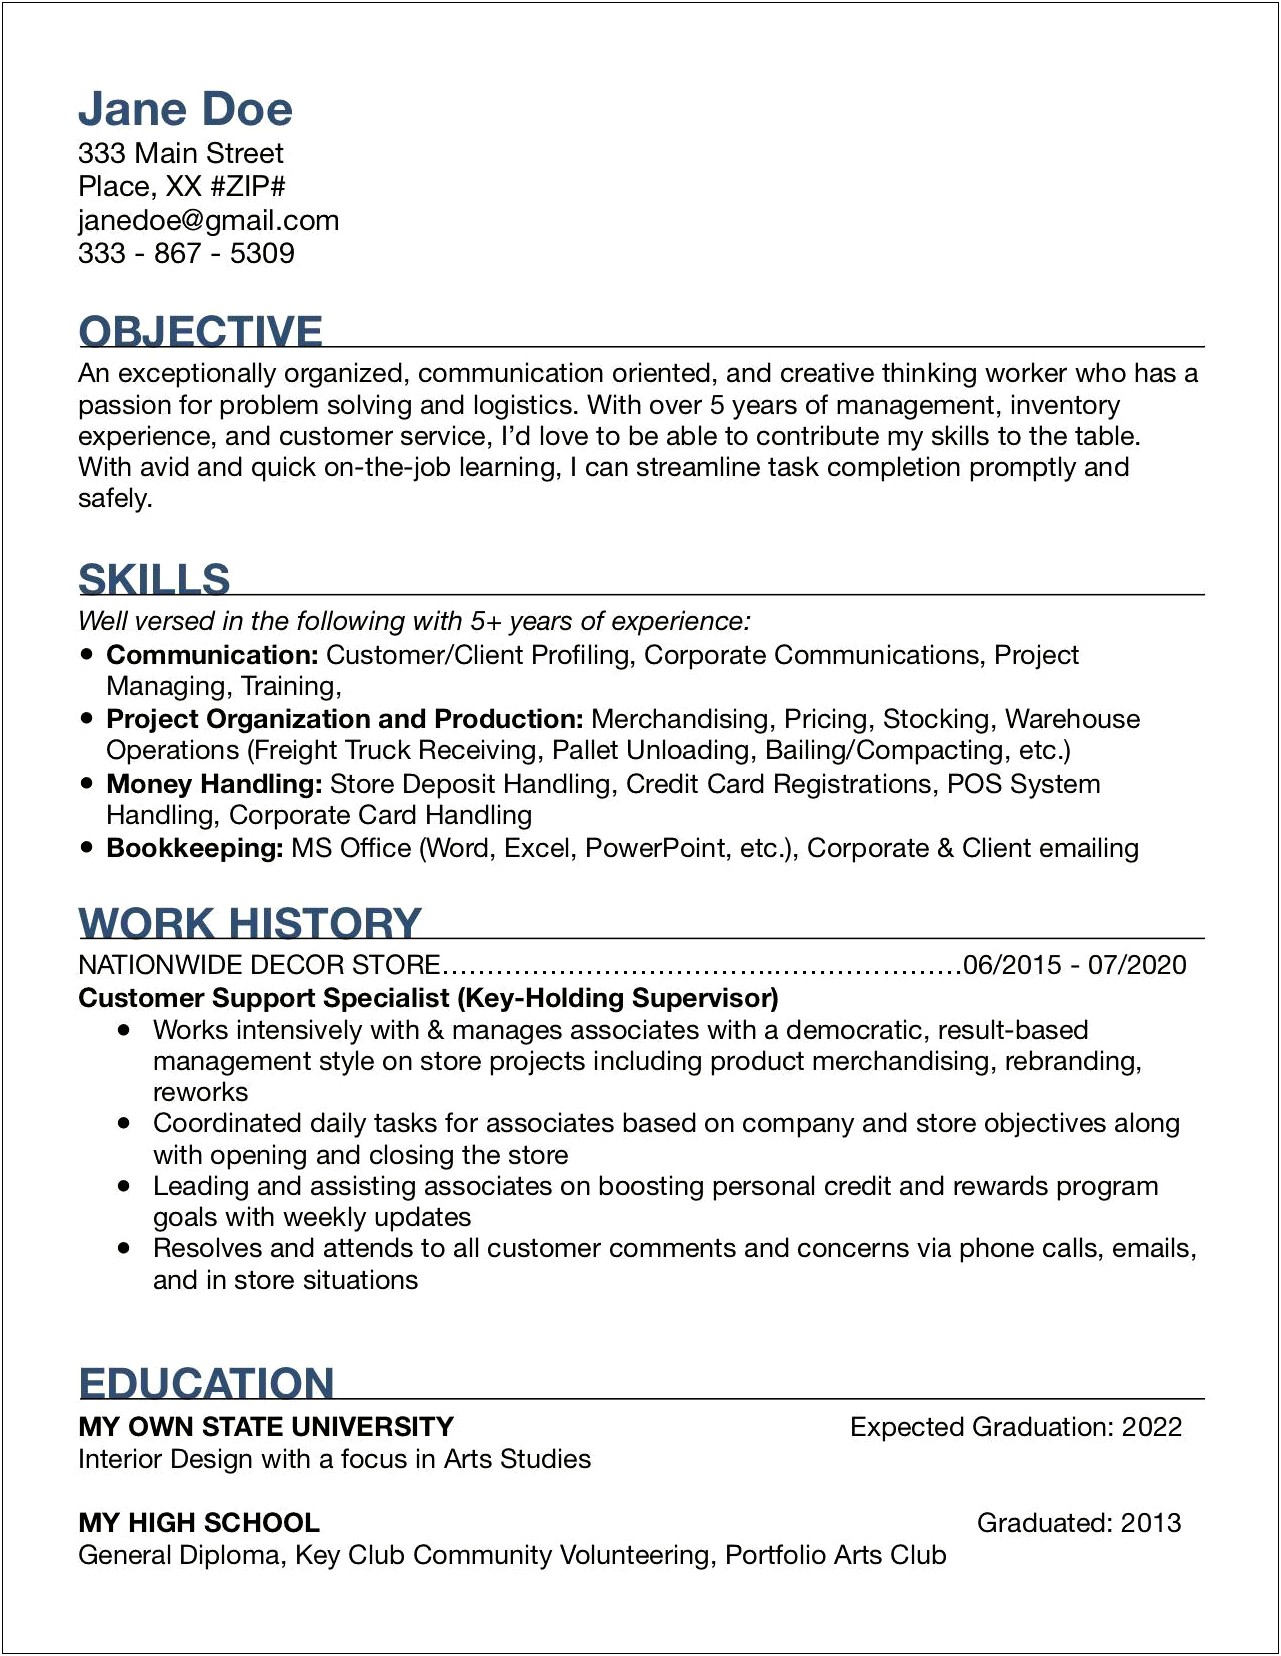 Resume Objective For Retail First Job